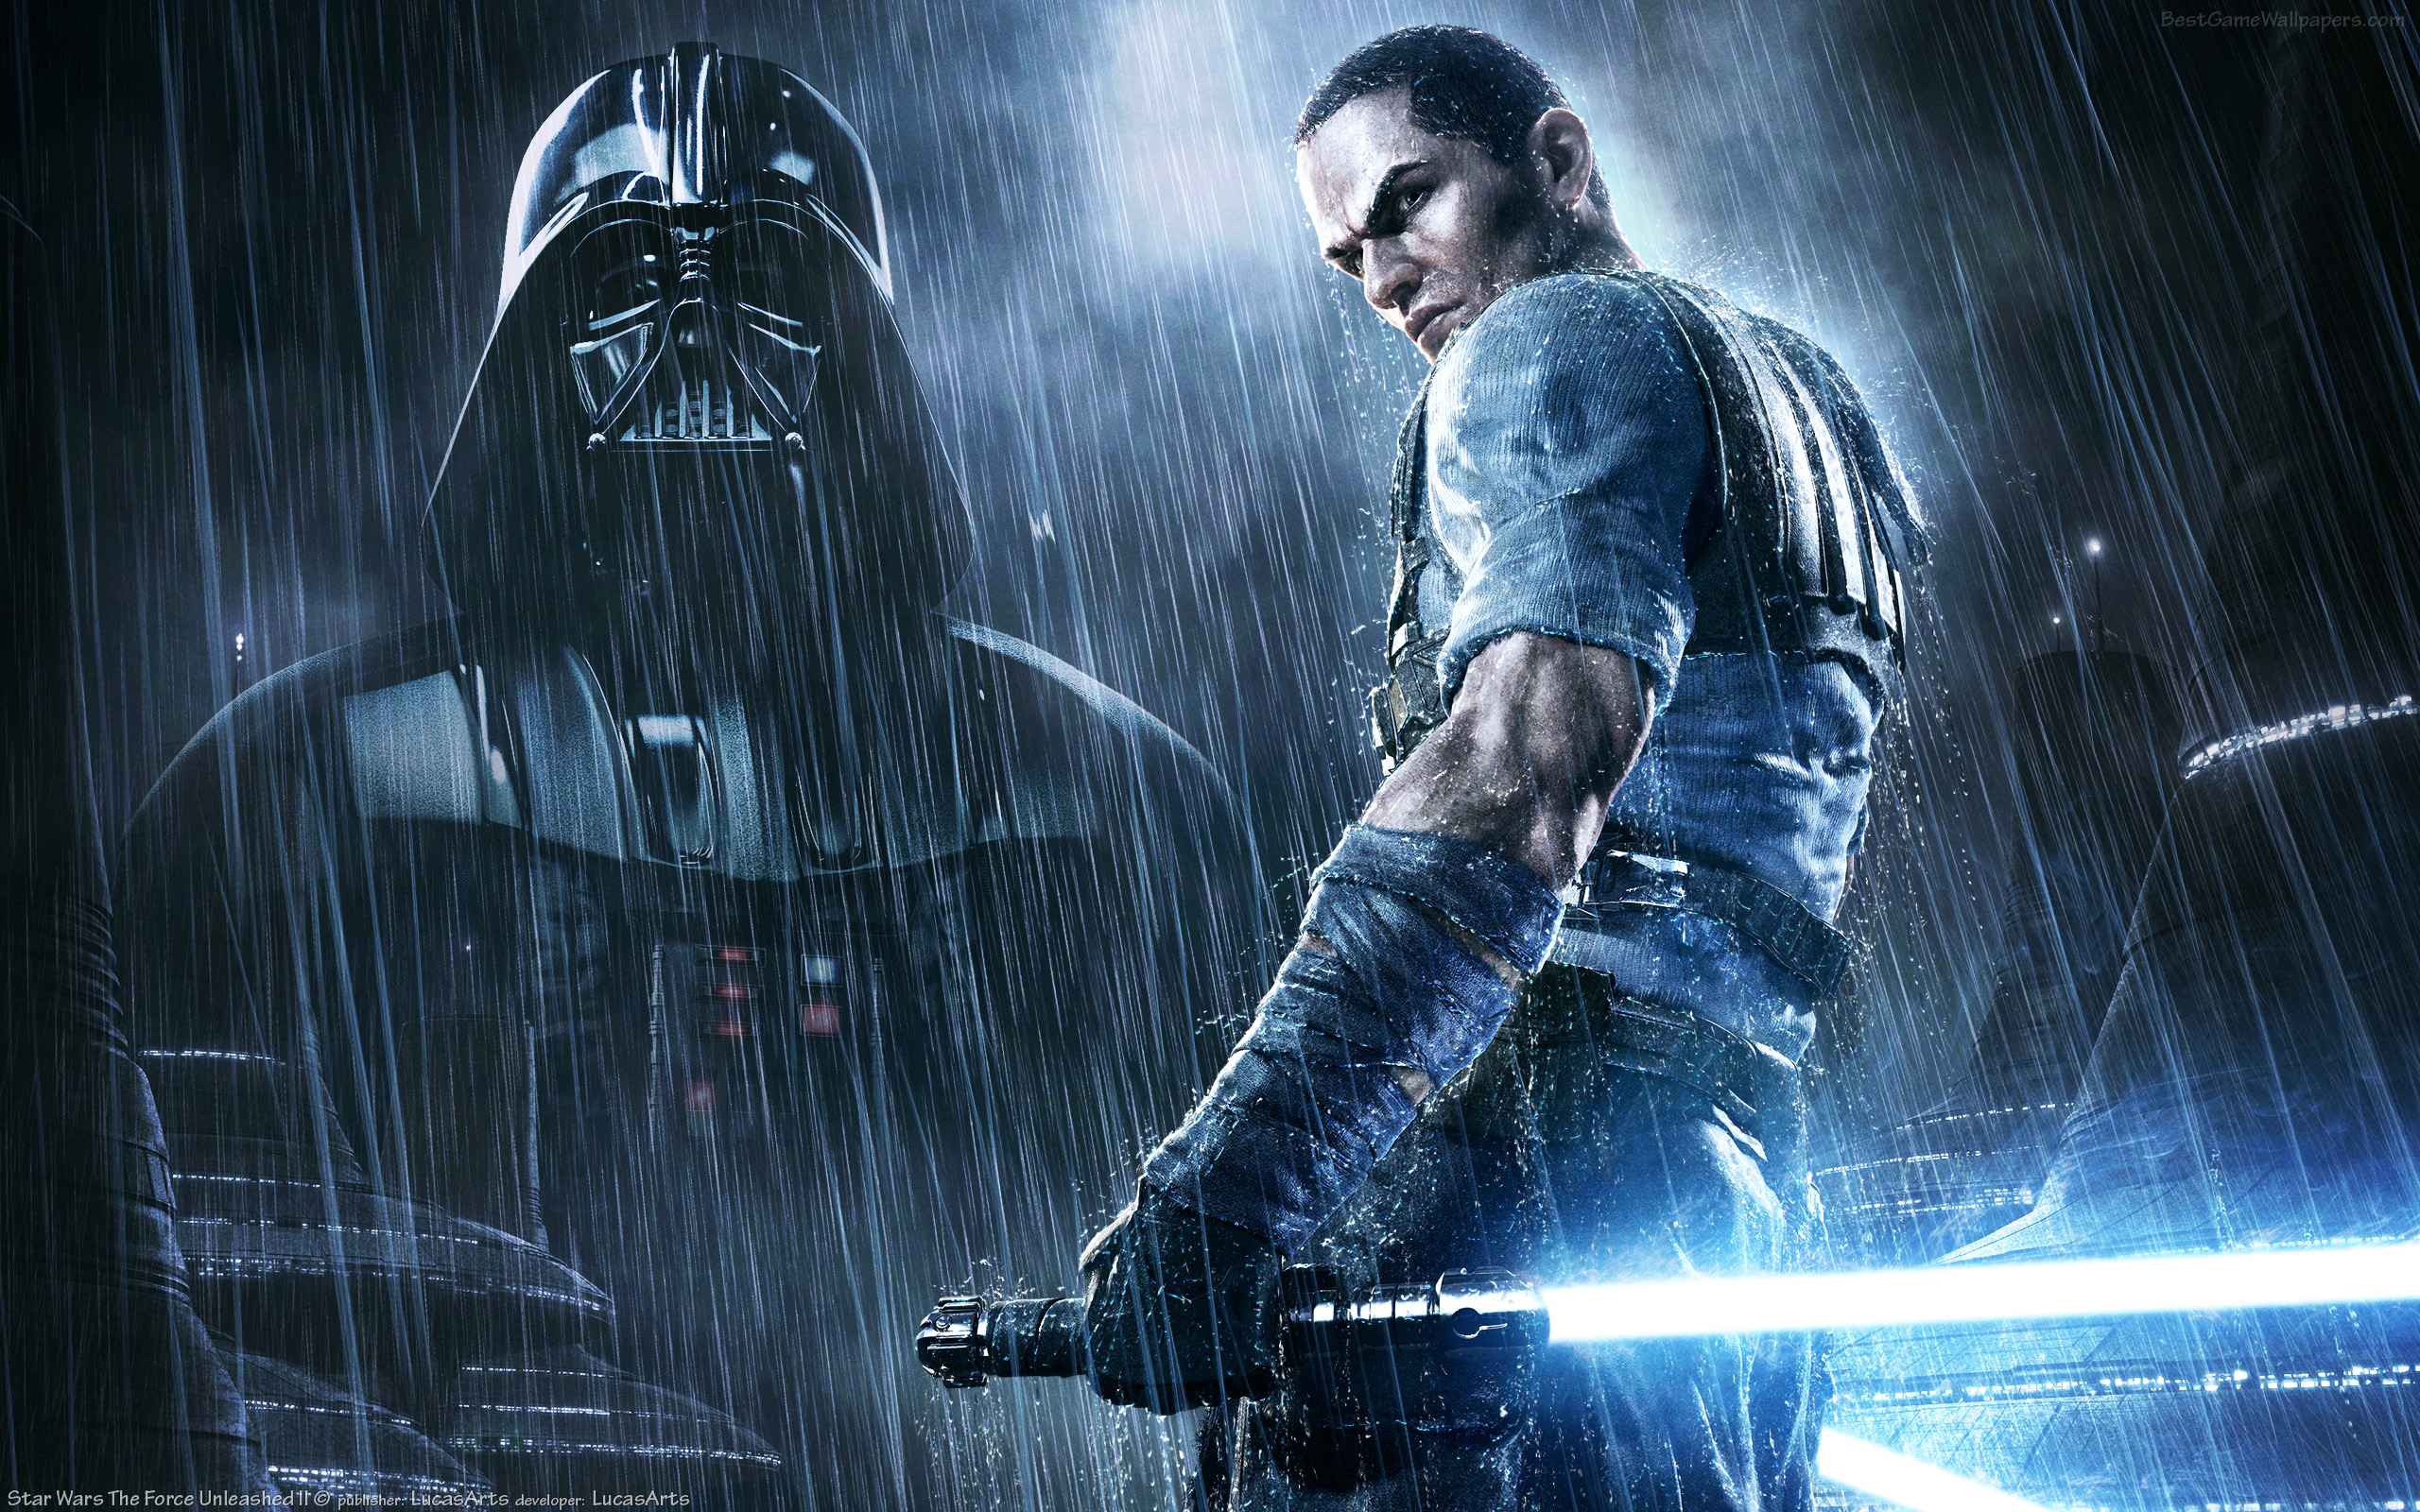 HQ Star Wars: The Force Unleashed II Wallpapers | File 1892.69Kb